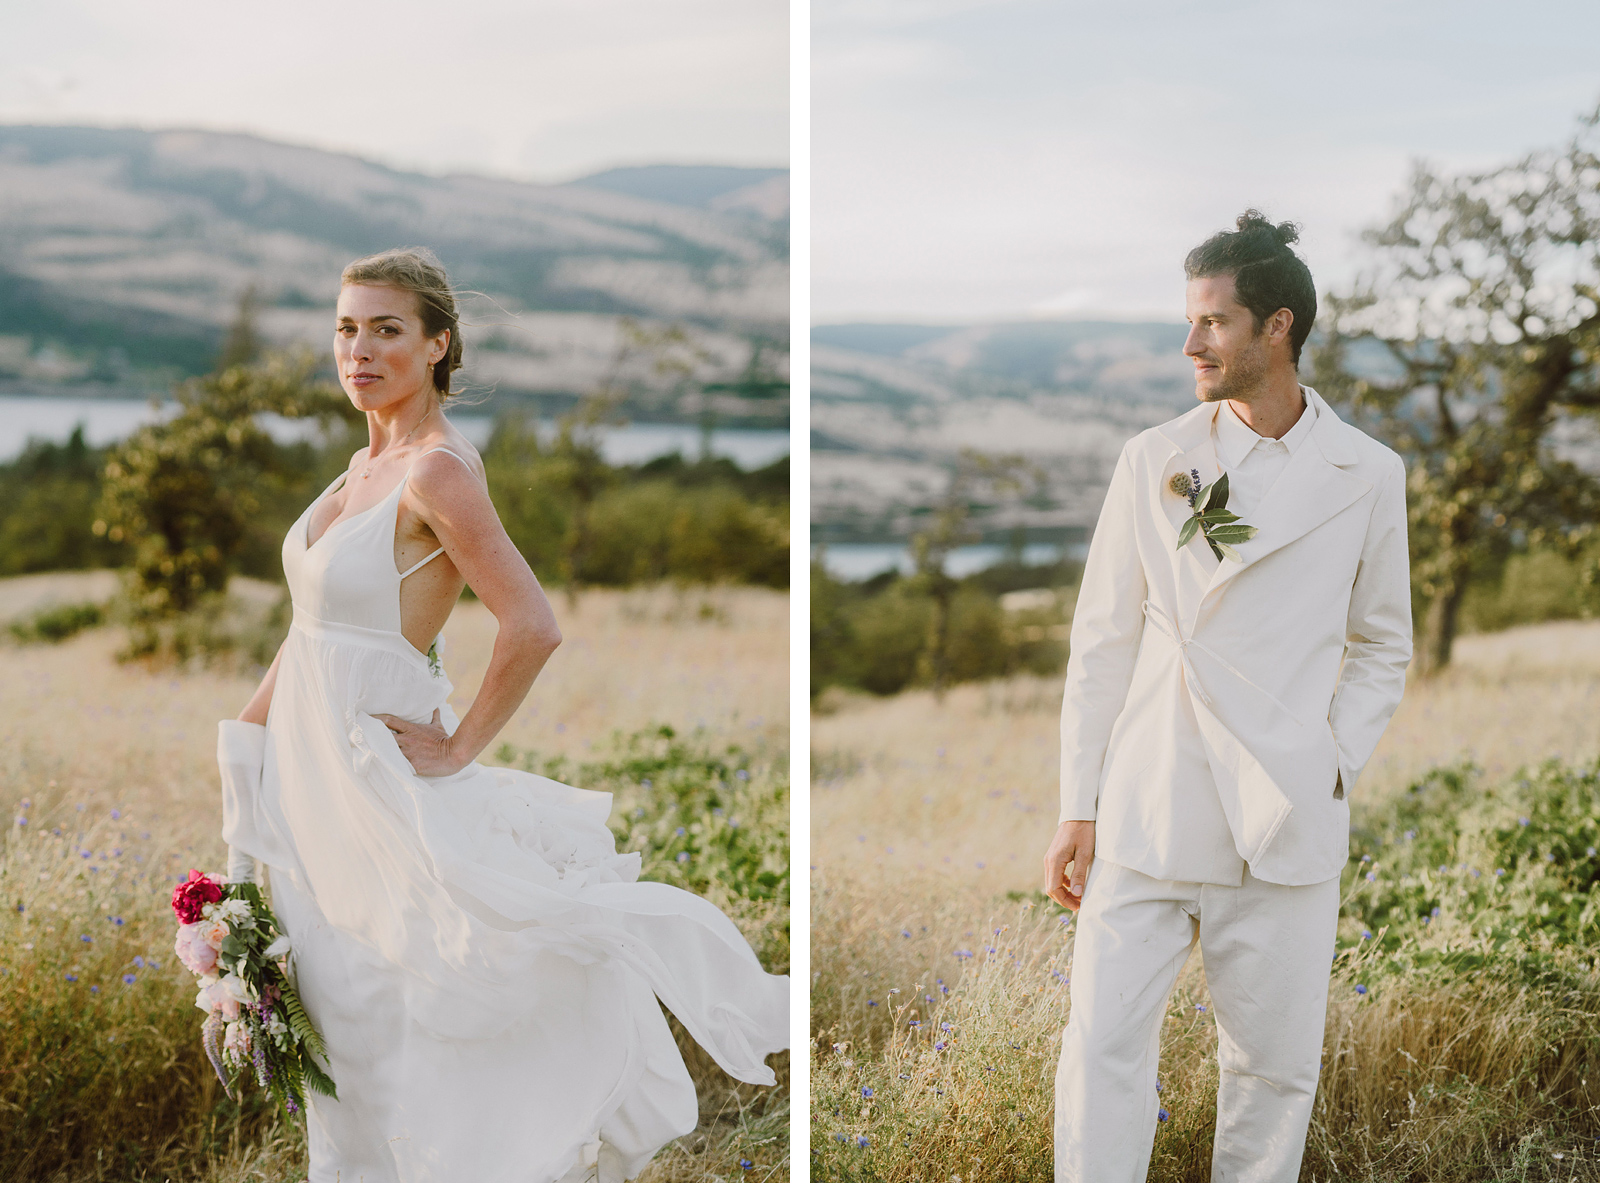 Fashionable portraits of bride and groom at a Columbia Gorge River Wedding in Oregon